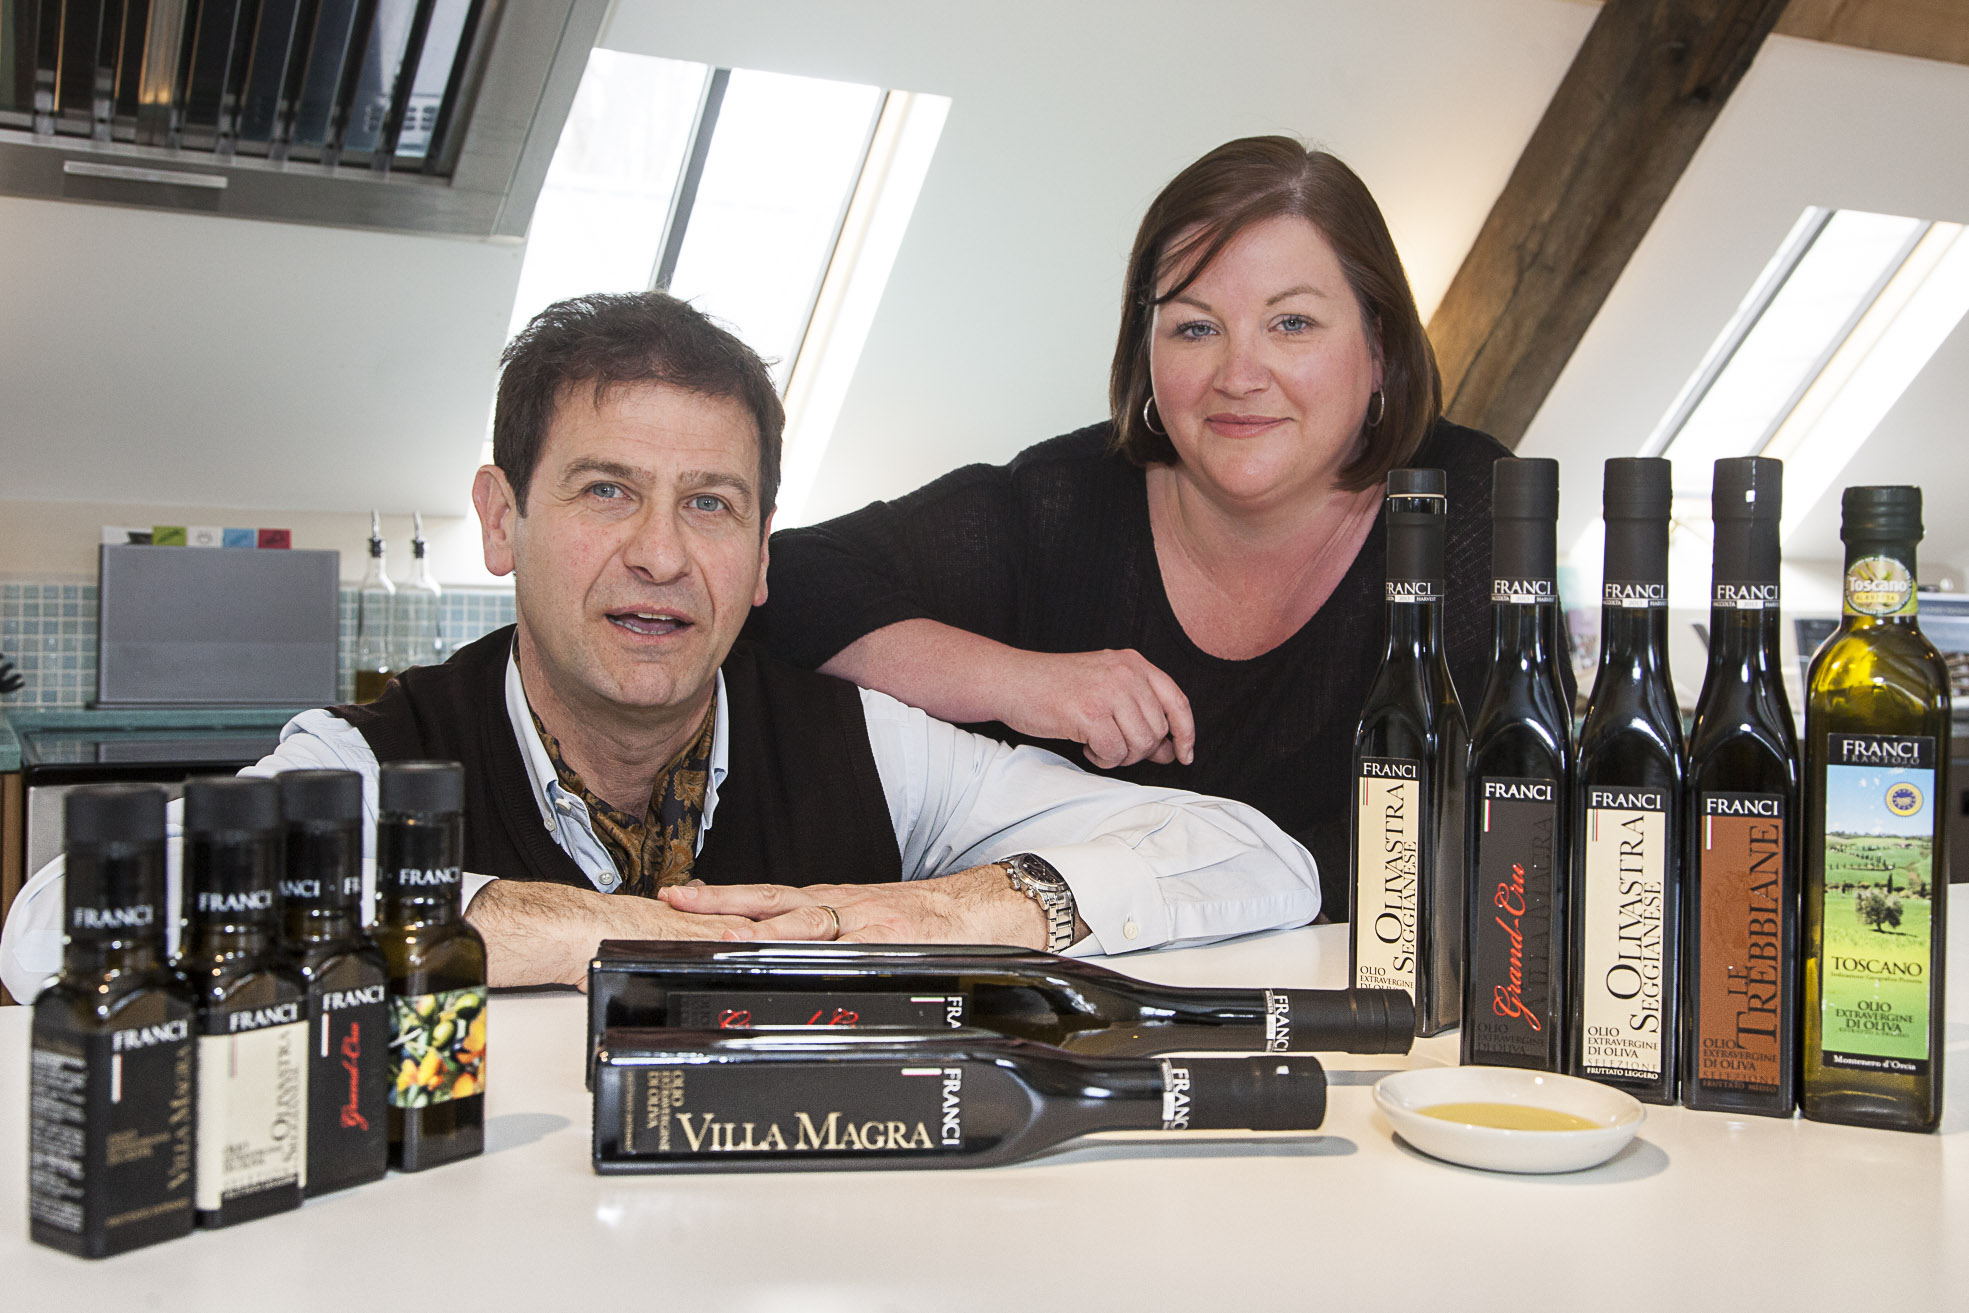 Award winning Italian specialist joins forces with Bodnant Cookery School